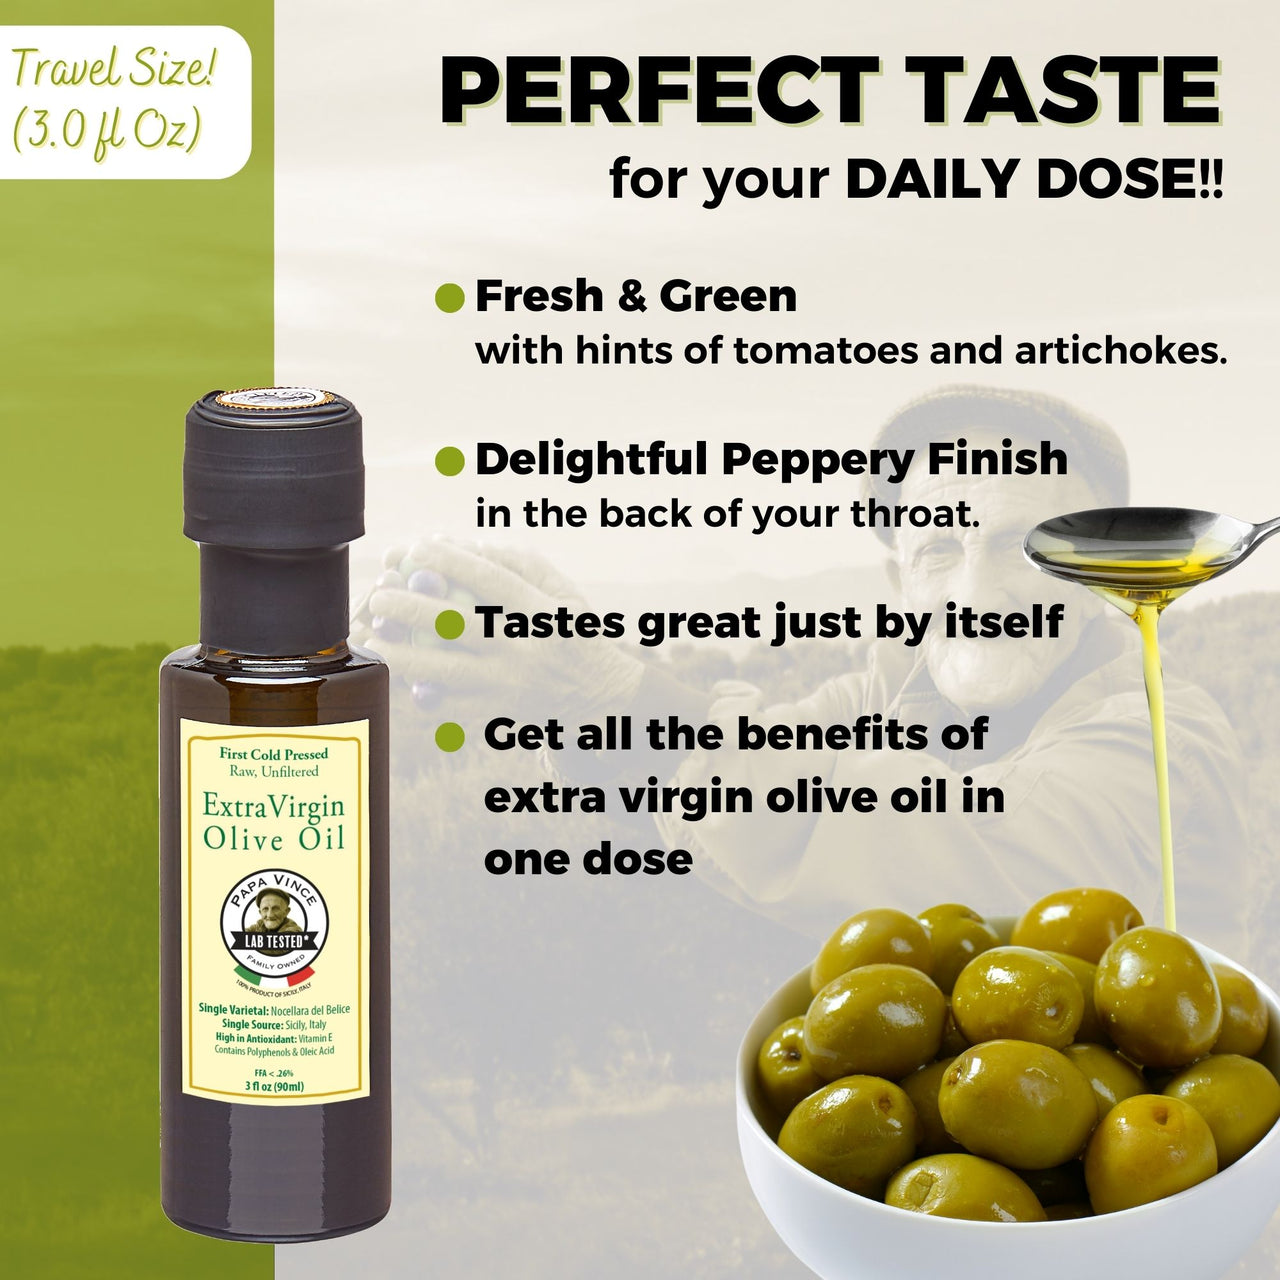 Olive Oil Extra Virgin Single Estate from our family in Sicily, Clean Food, First Cold Pressed 2020/21, Italy, Unblended, Unfiltered, Unrefined, Robust, Rich in Antioxidant 3 fl oz